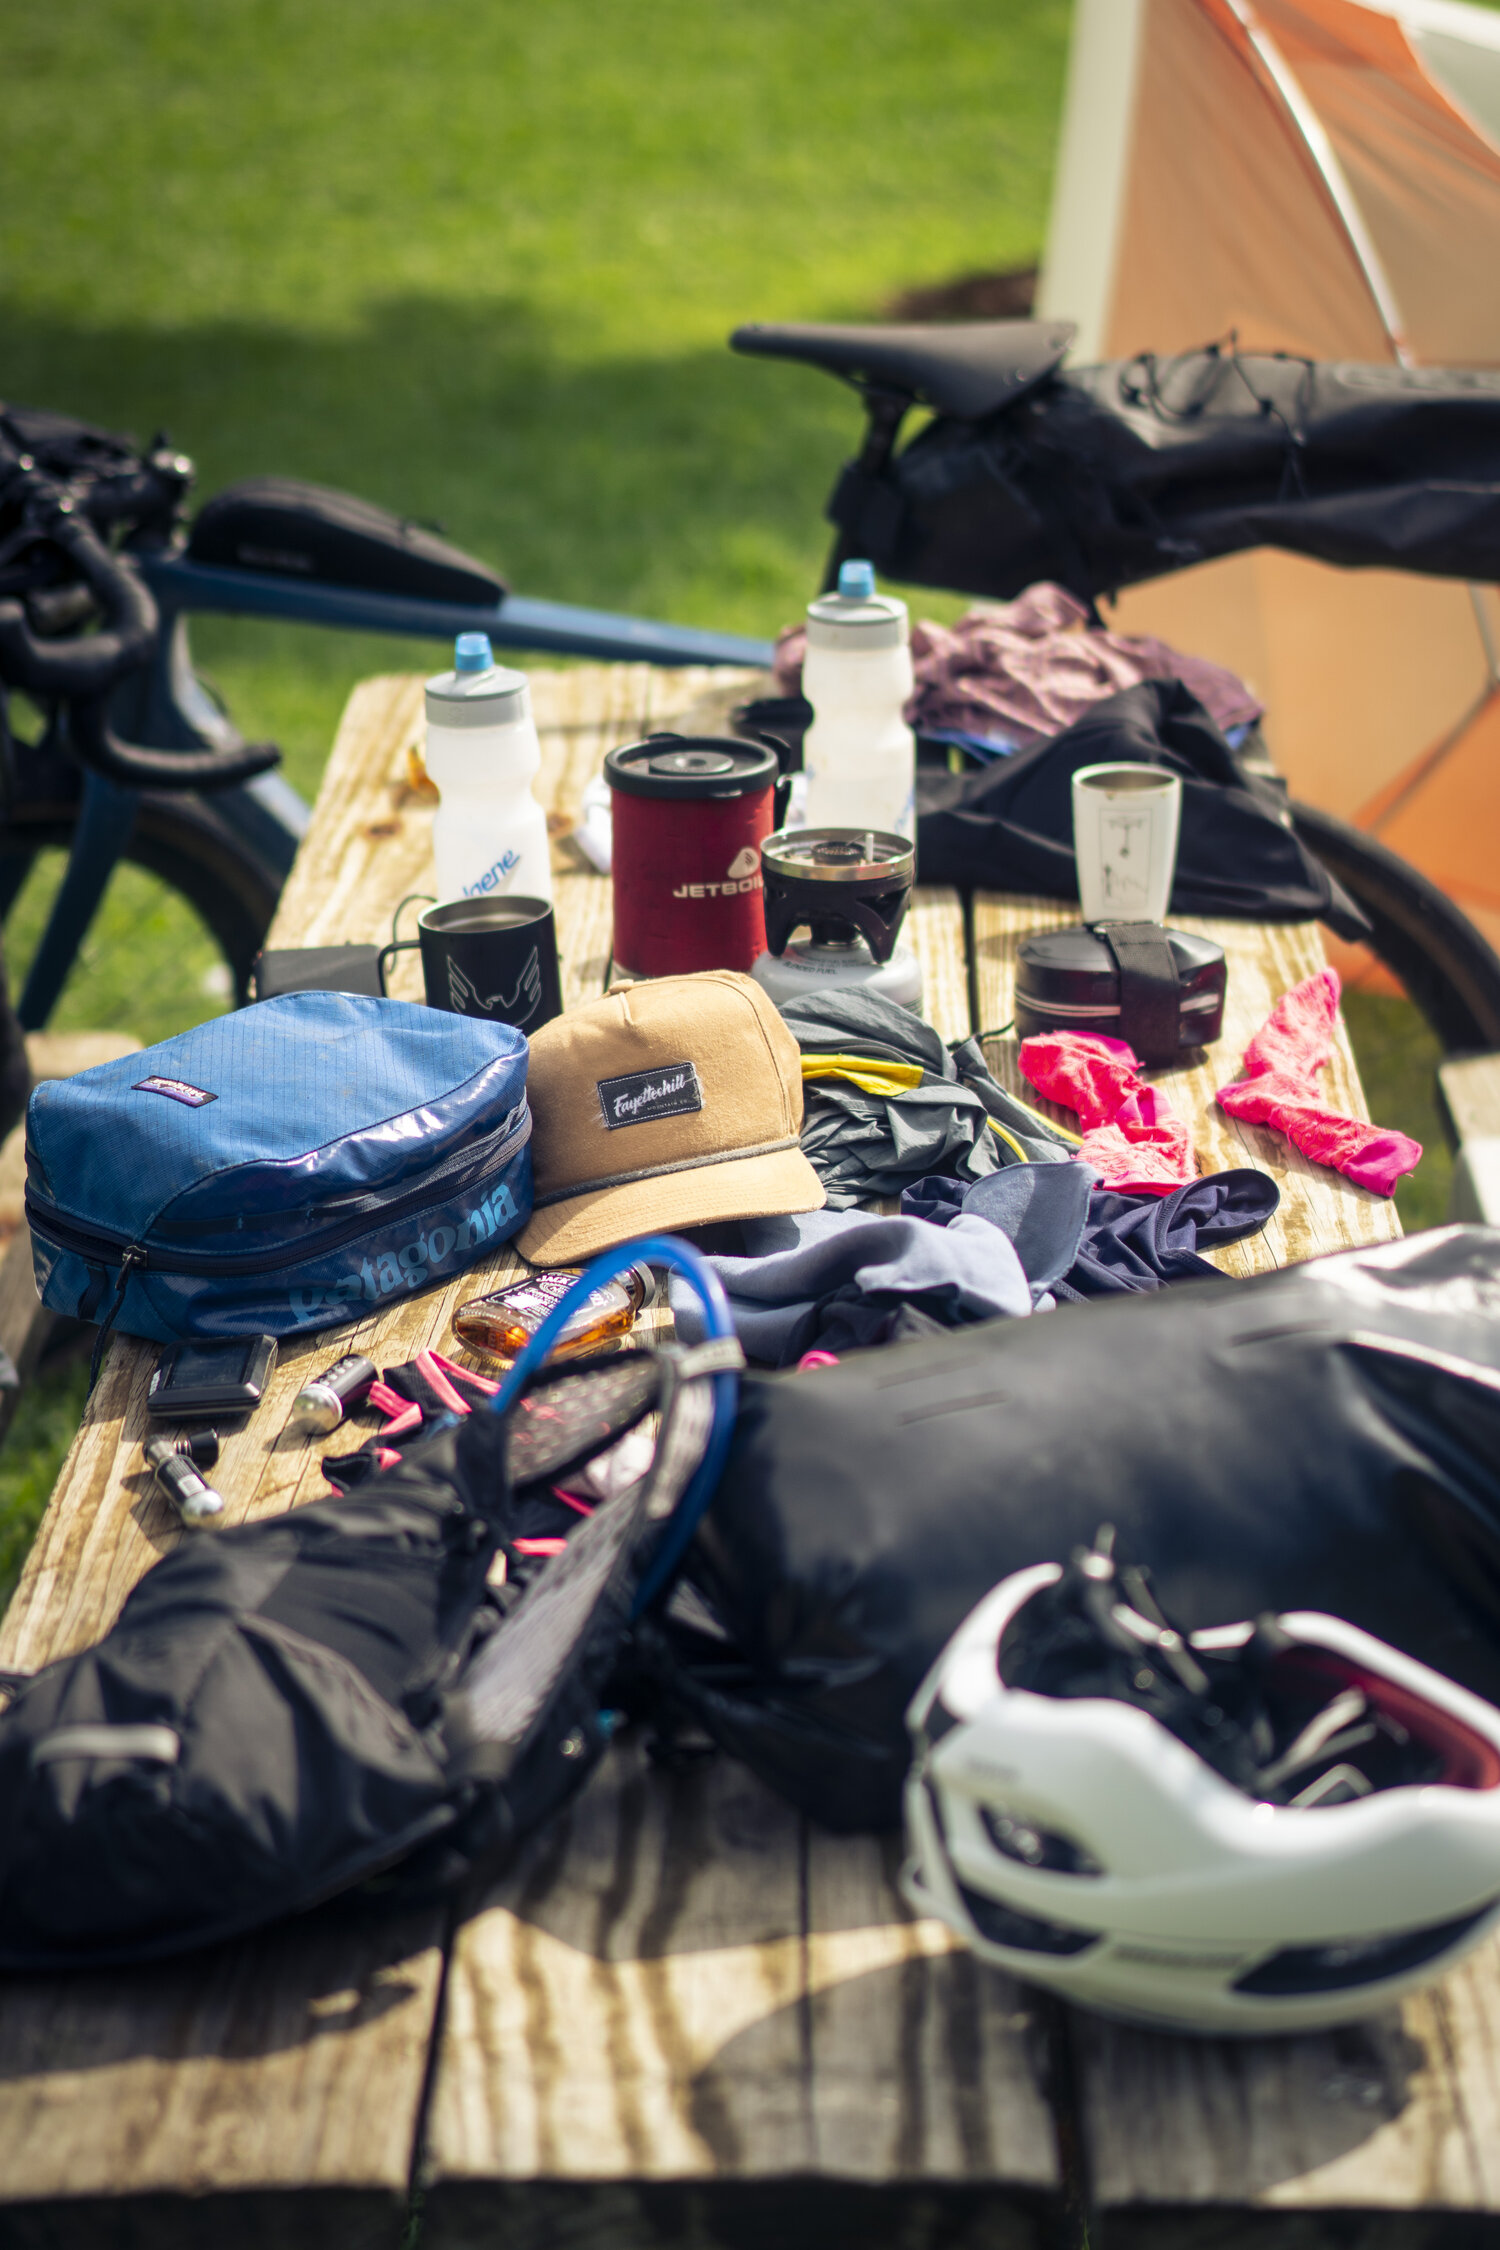 Camping gear gathered on a picnic table.